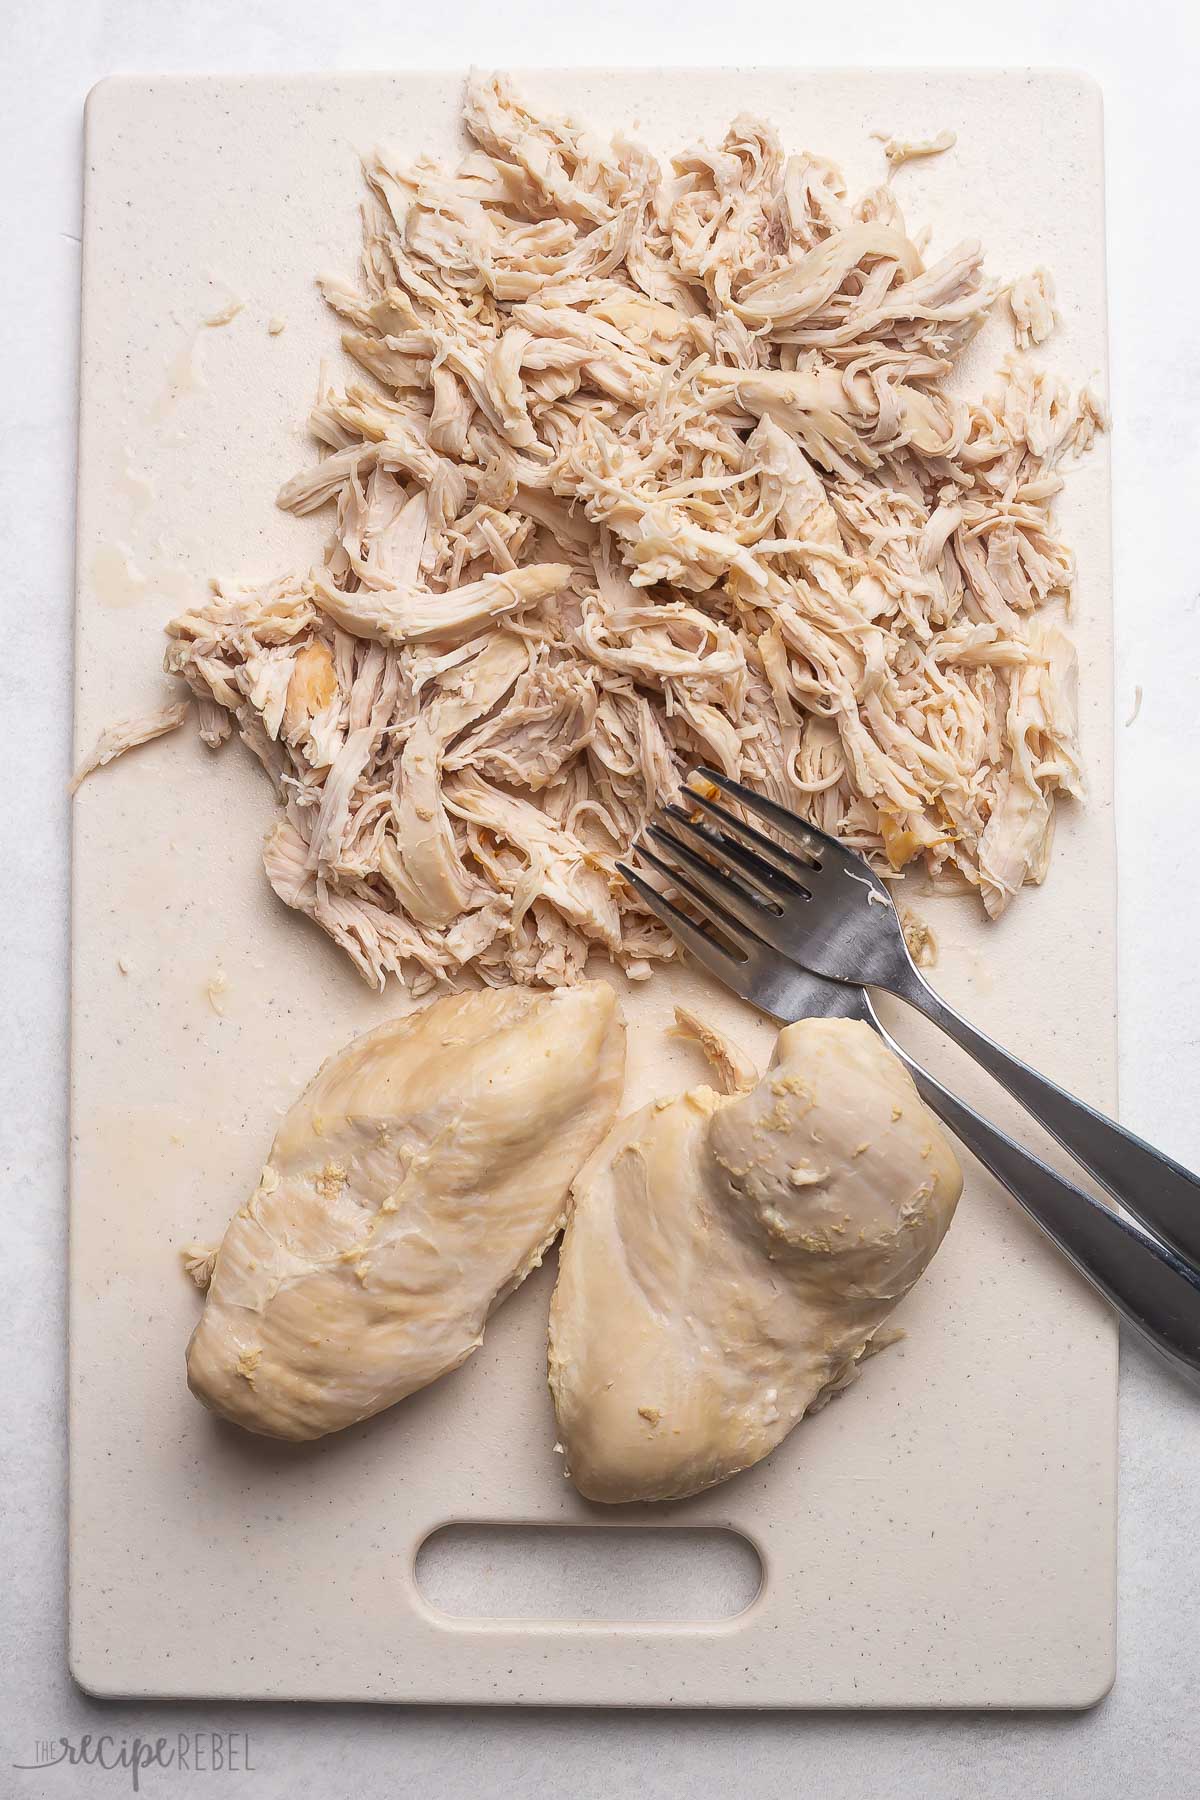 two forks shredding chicken breasts on a cutting board.